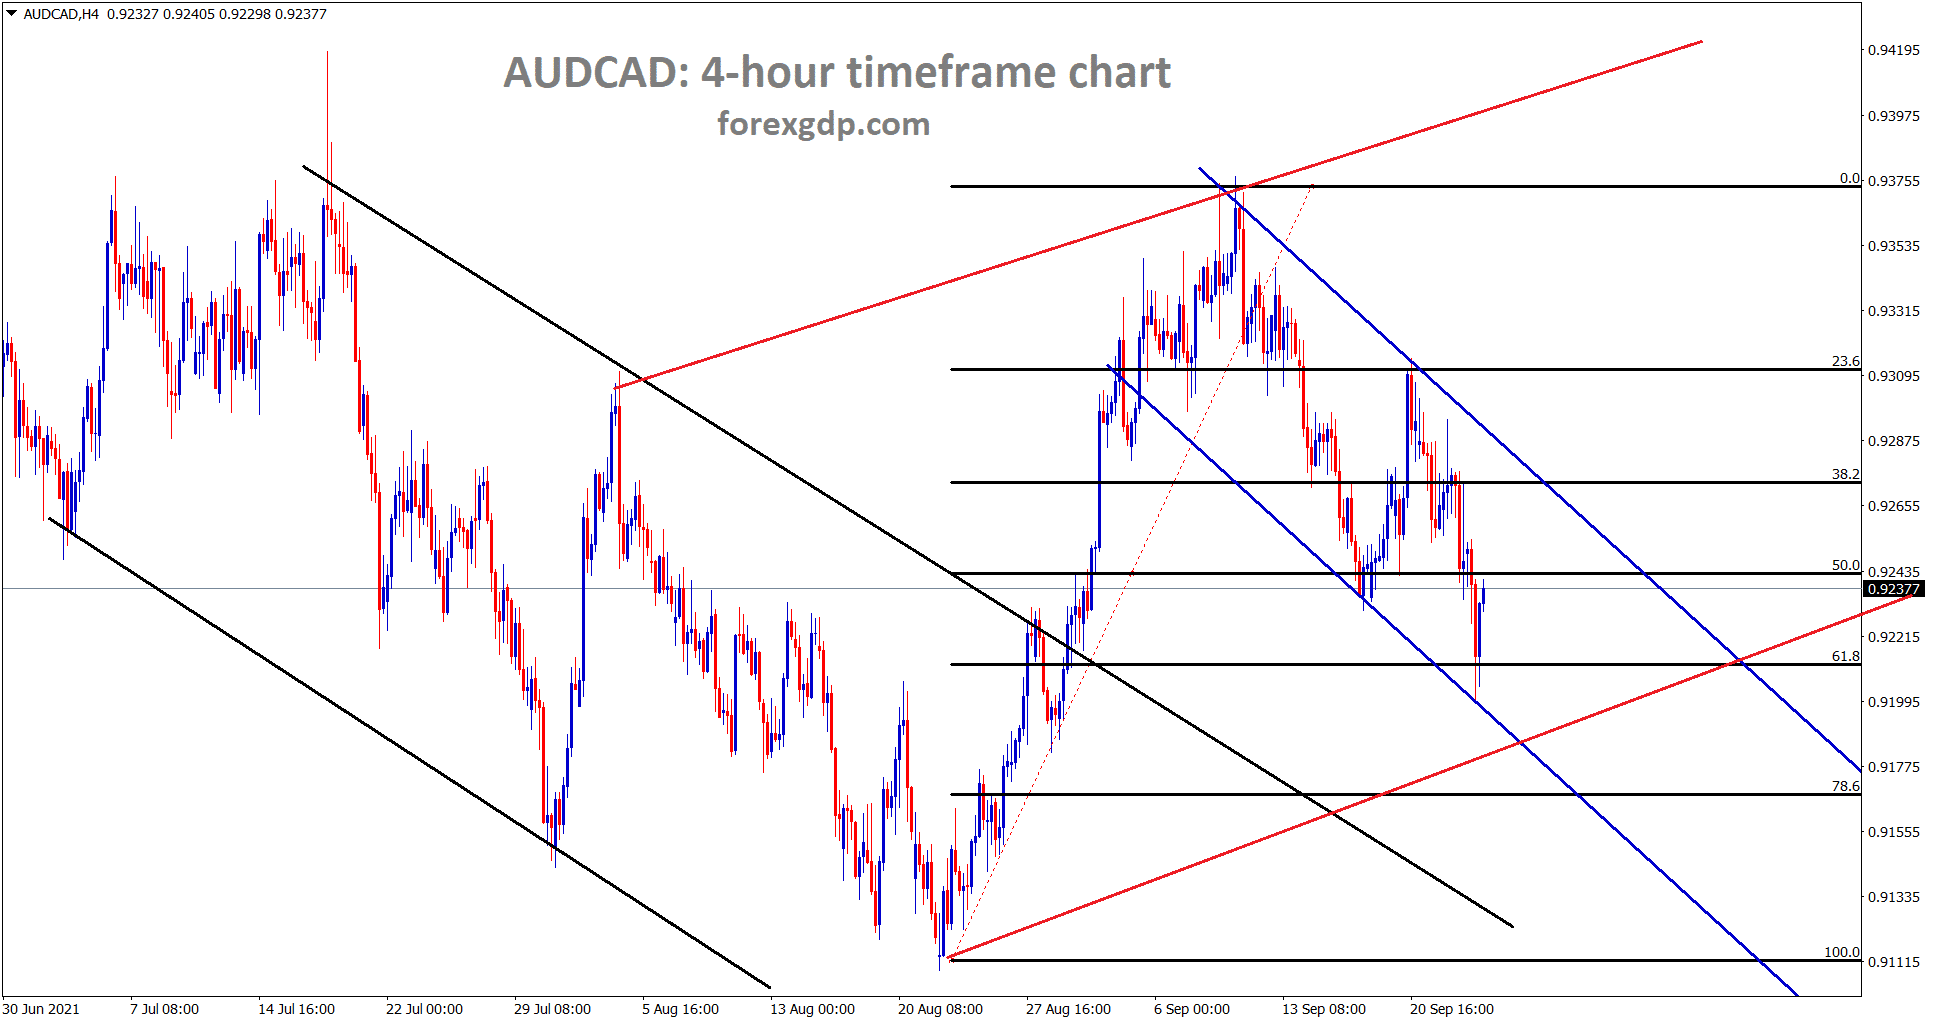 AUDCAD is moving between the channel ranges and rebounding from 61.8 level